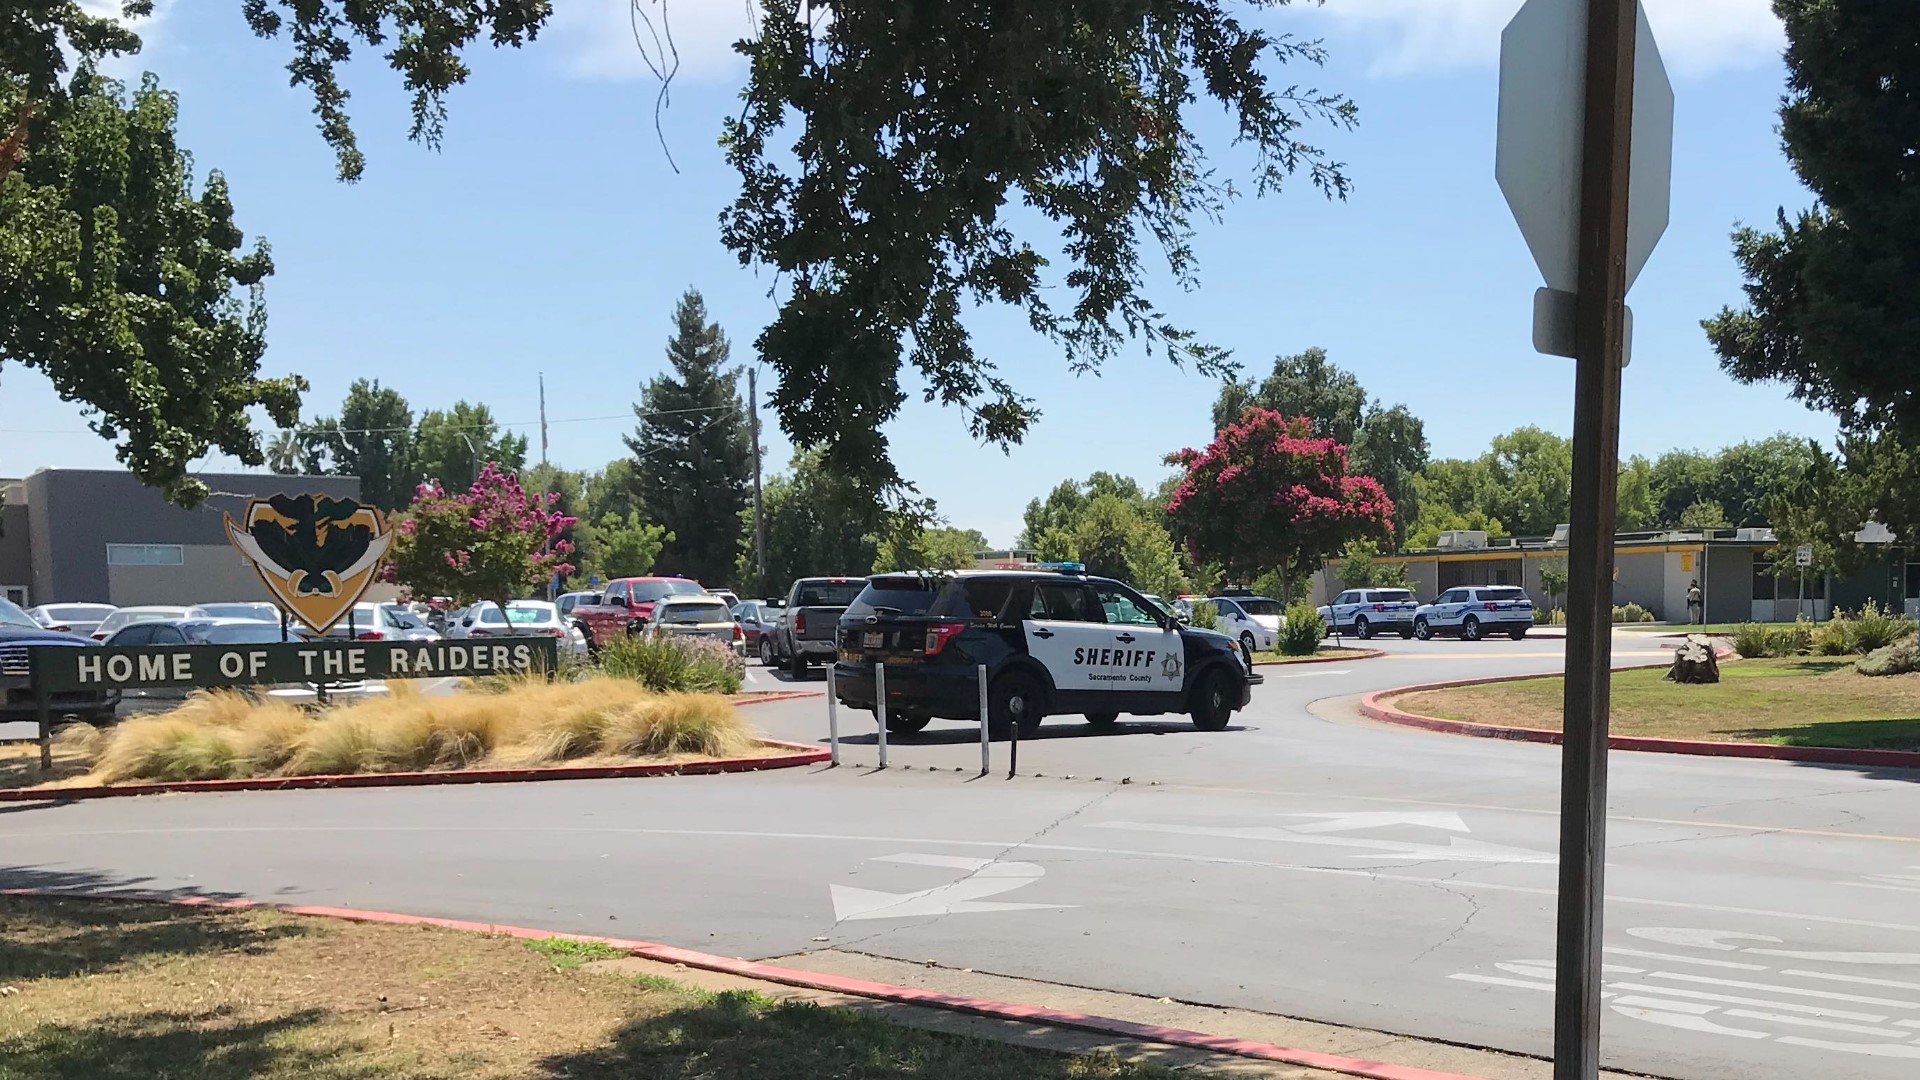 An Elk Grove Unified student ended up in police custody after posting what authorities are calling a threat on social media. The threat was reported to the Elk Grove Unified School District's Department of Safety and Security Tuesday afternoon.